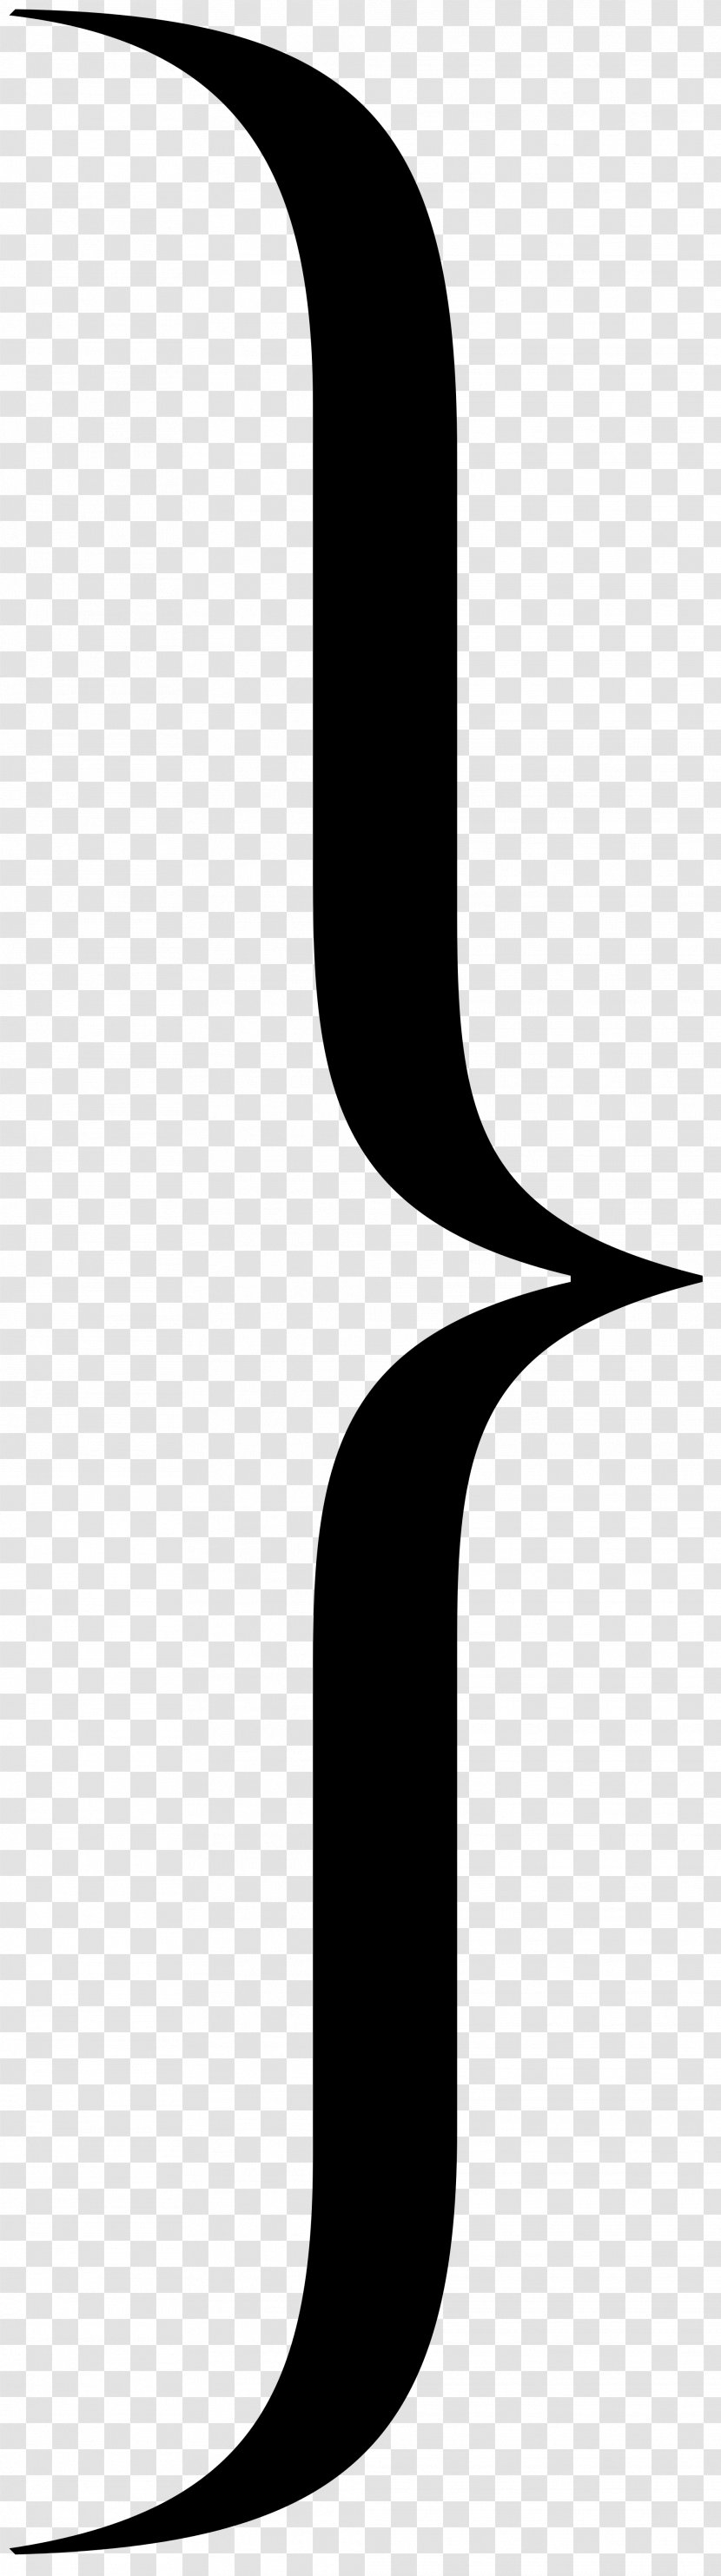 Bracket Symbol Mimicry In Butterflies Parenthesis - Accolade Transparent PNG